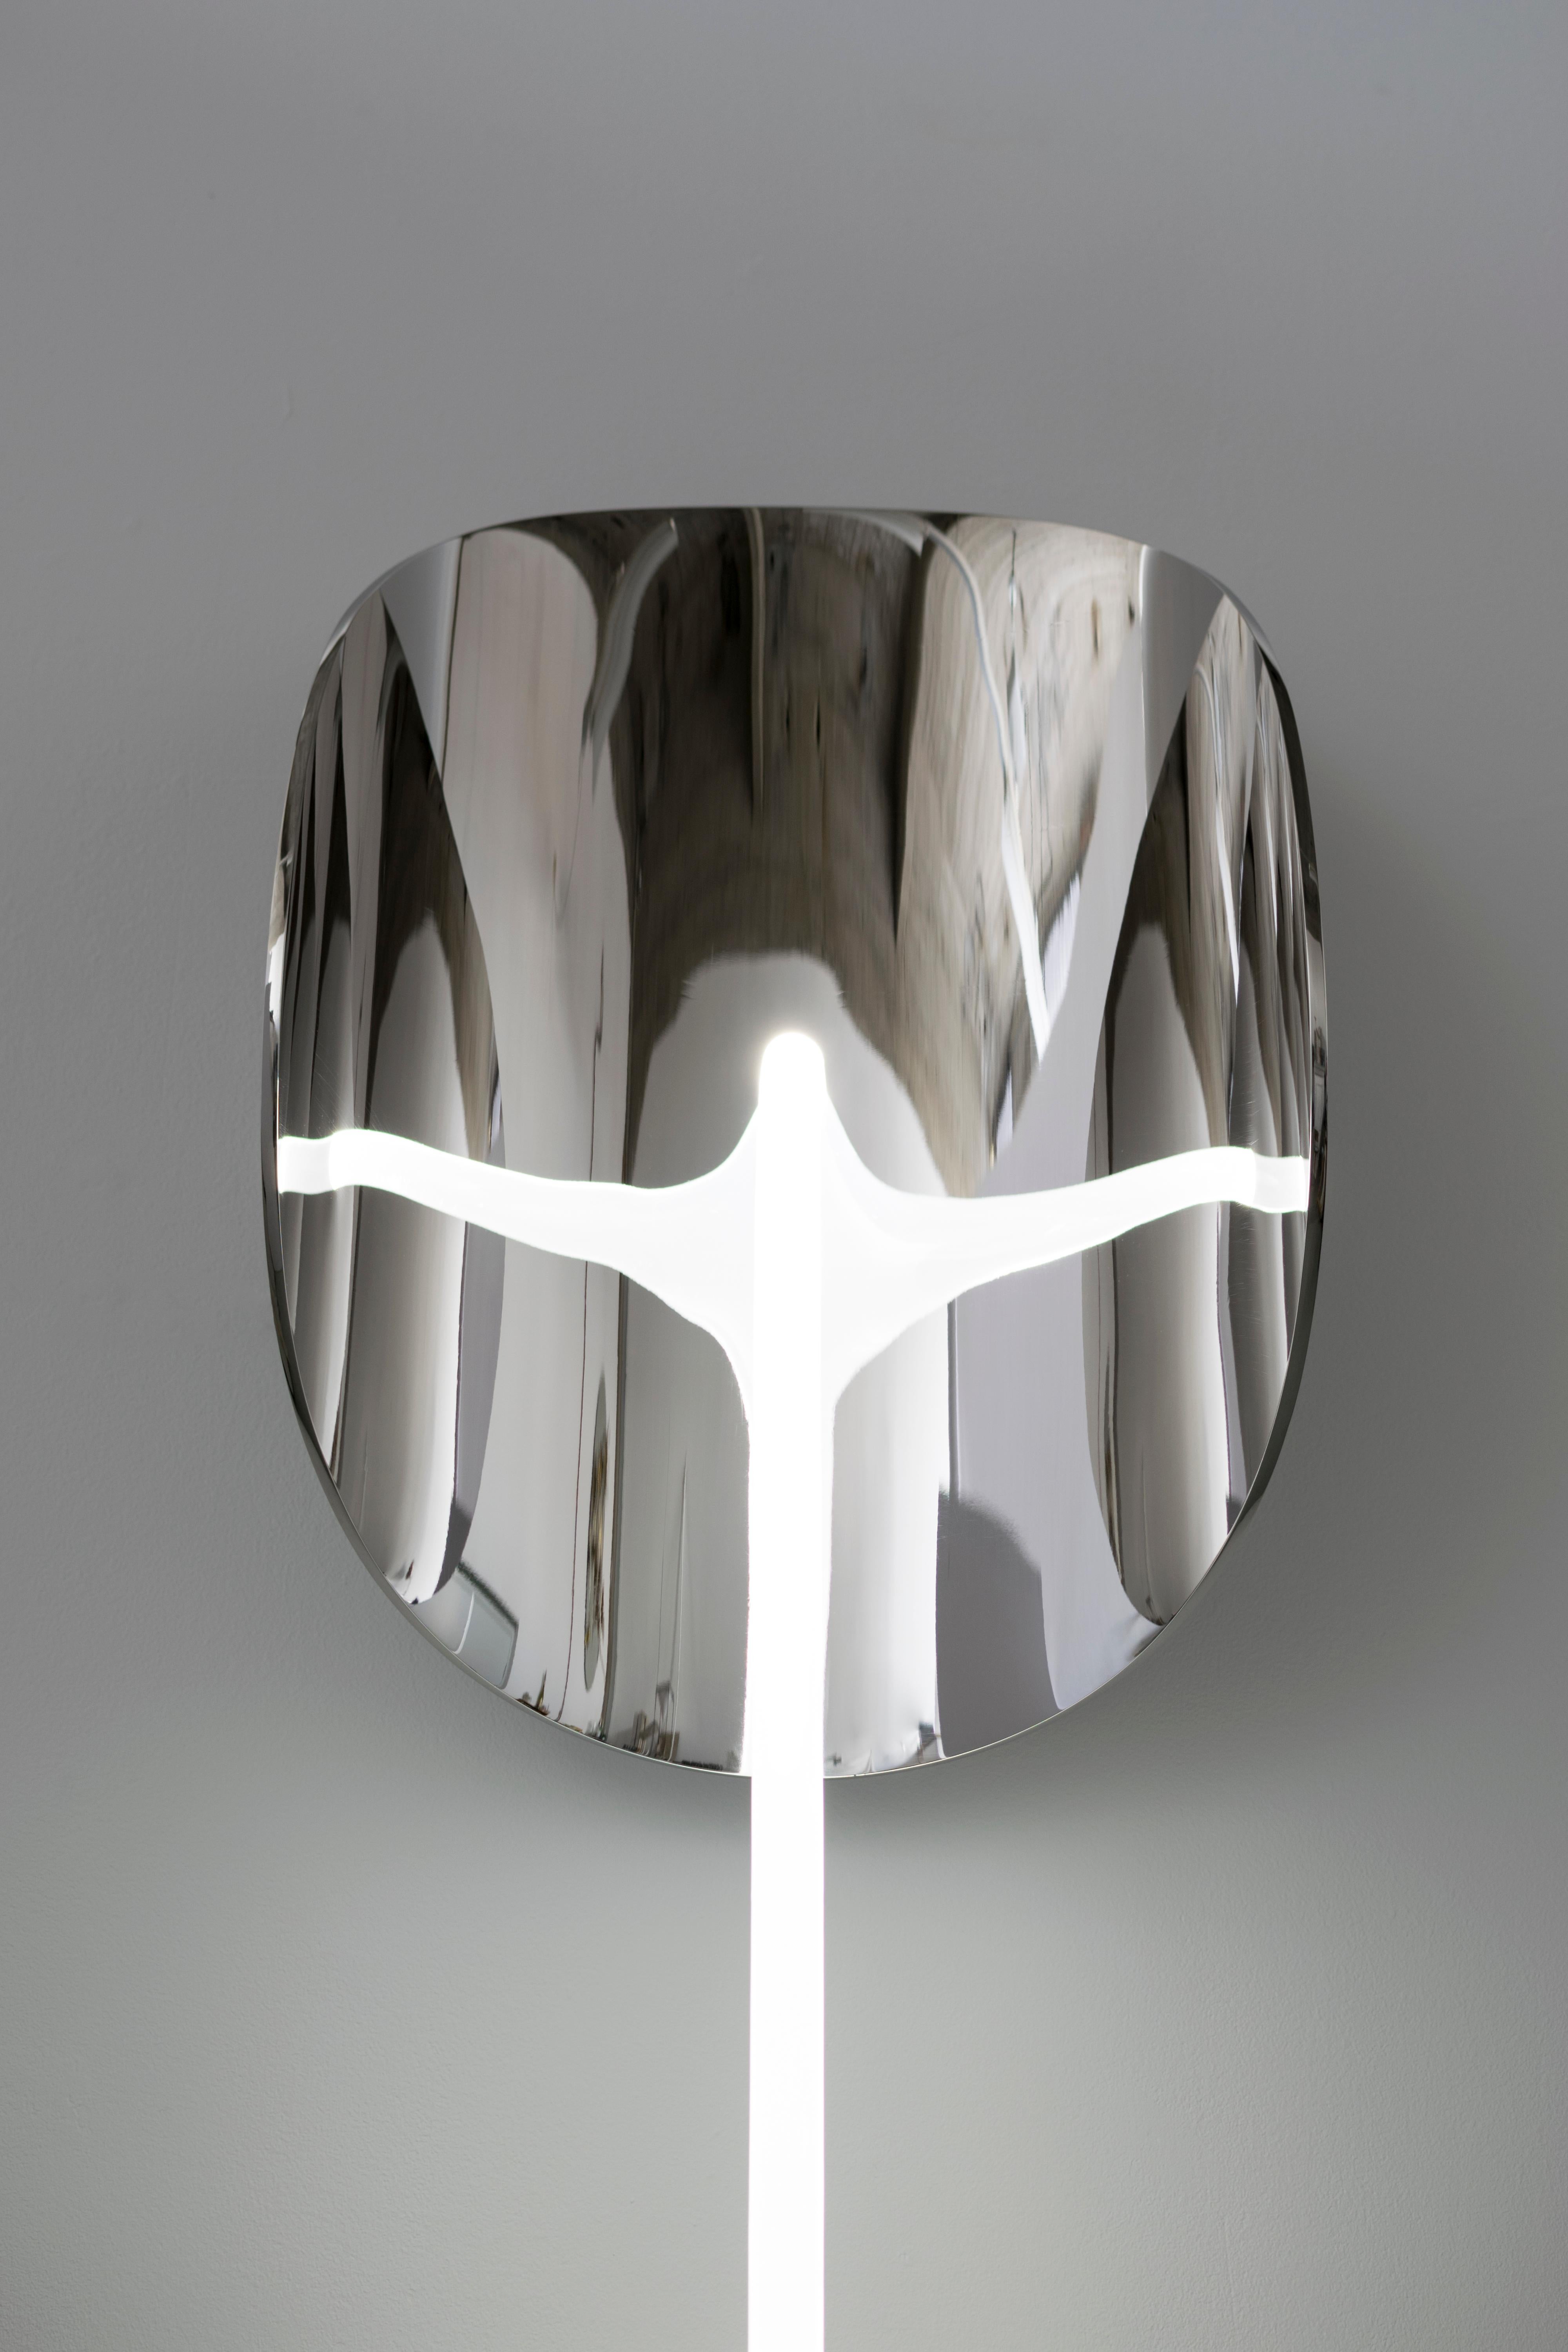 Elusive 08
A beautiful piece exploring the line between visible and invisible: half mirror, half floor lamp, half sculpture.
By Maximilian Michaelis.

Polished stainless steel, acrylic glass, Led
Measure: 190 x 36 x 30 cm.